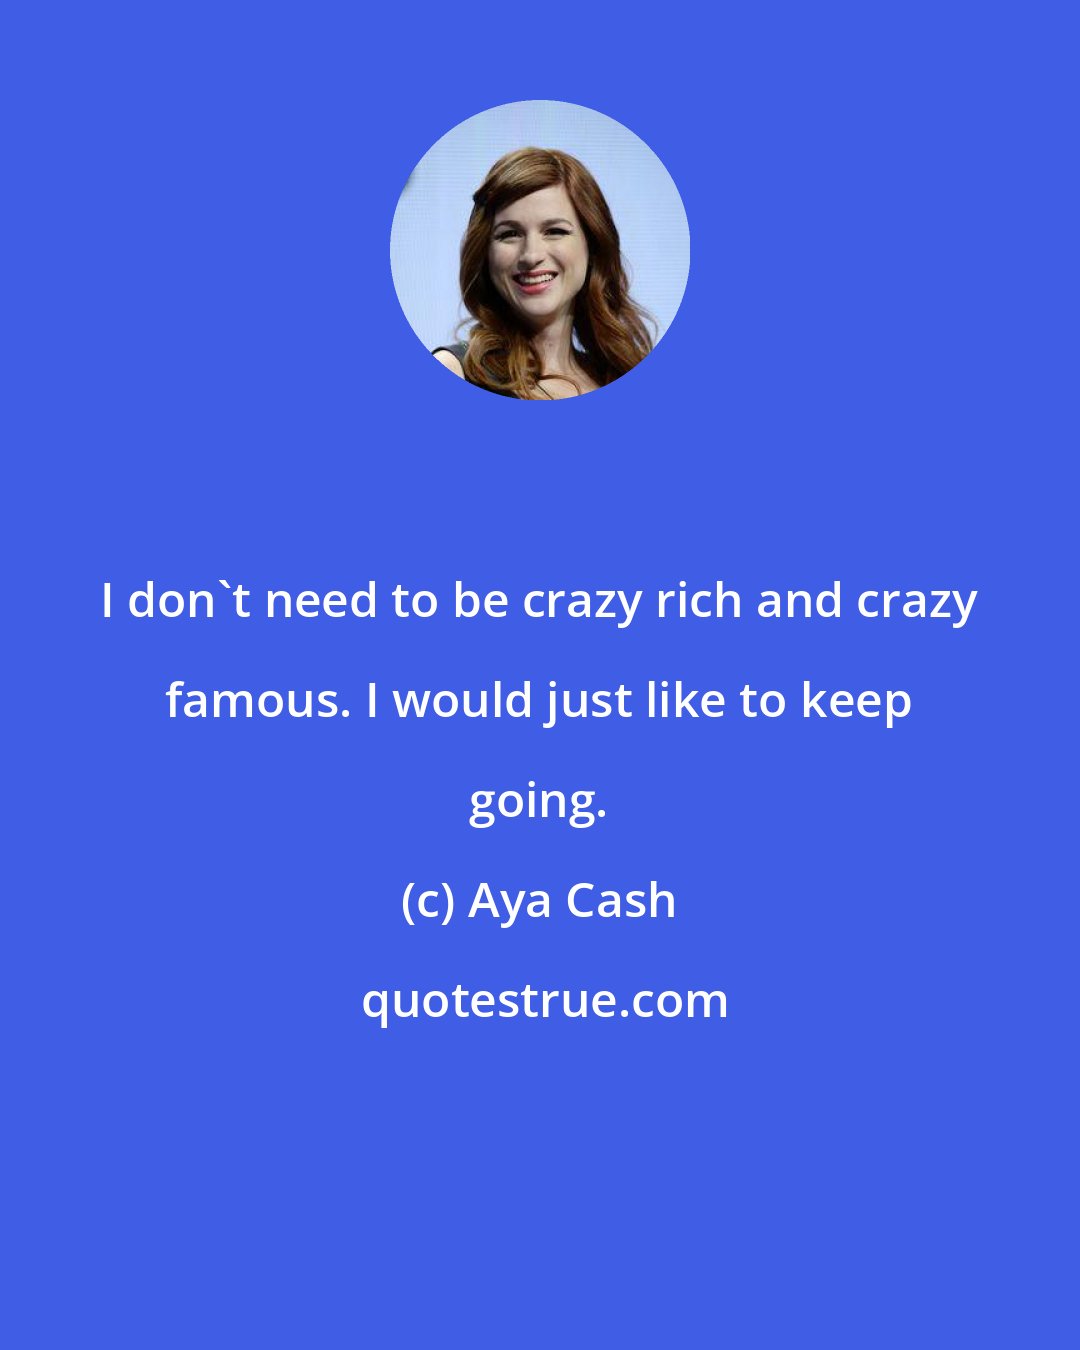 Aya Cash: I don't need to be crazy rich and crazy famous. I would just like to keep going.